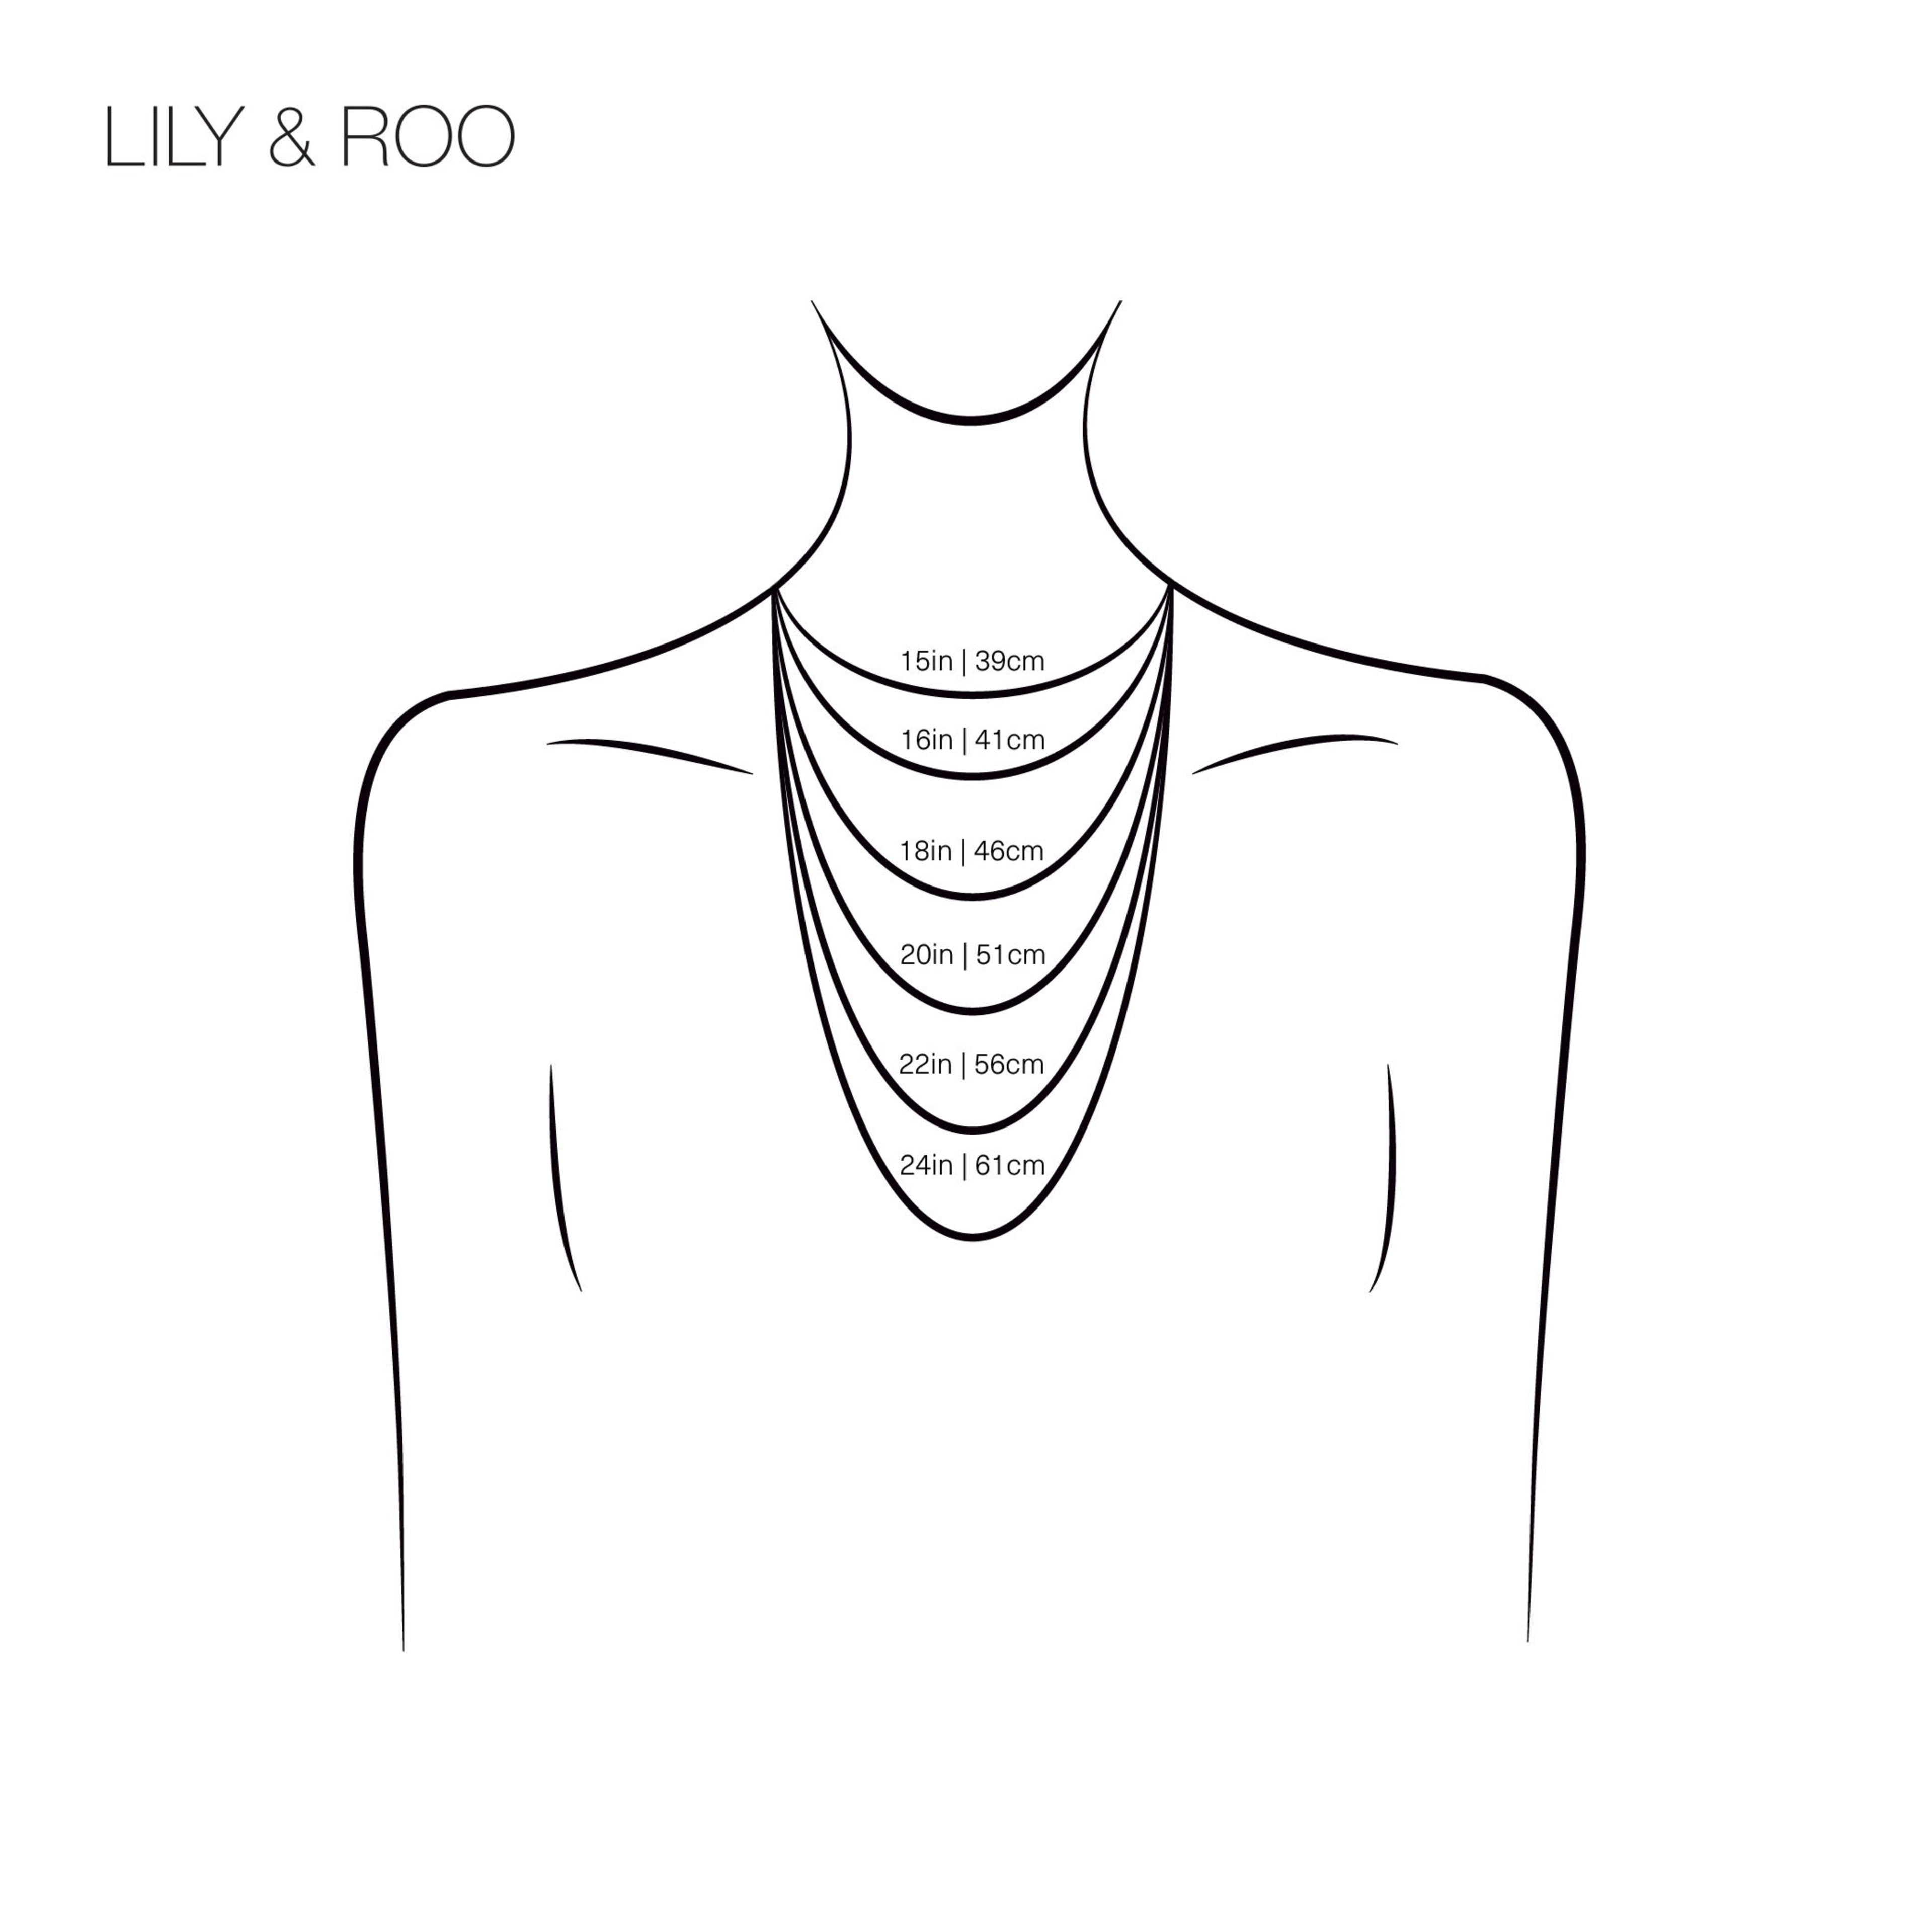 Necklace lengths drawn on a woman's silhouette with their lengths displayed in centimeters and inches